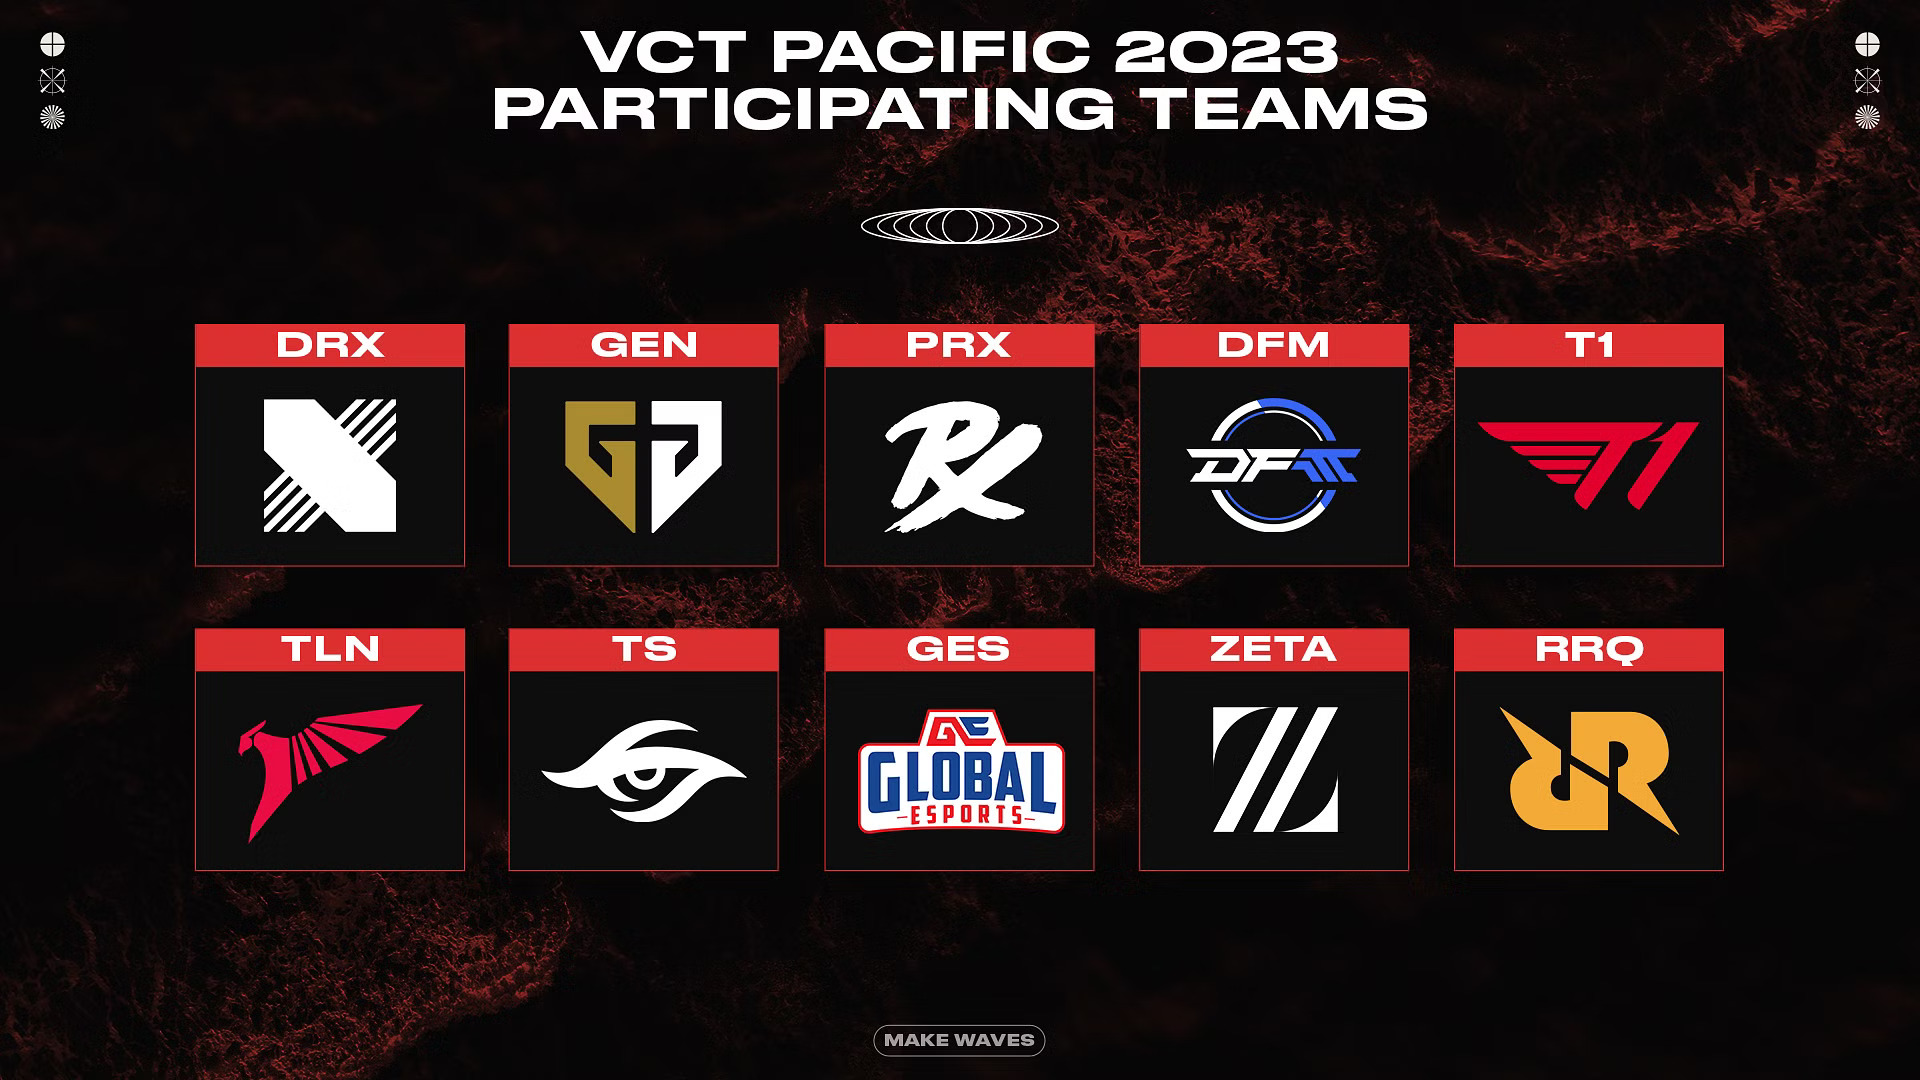 VCT Pacific 2023